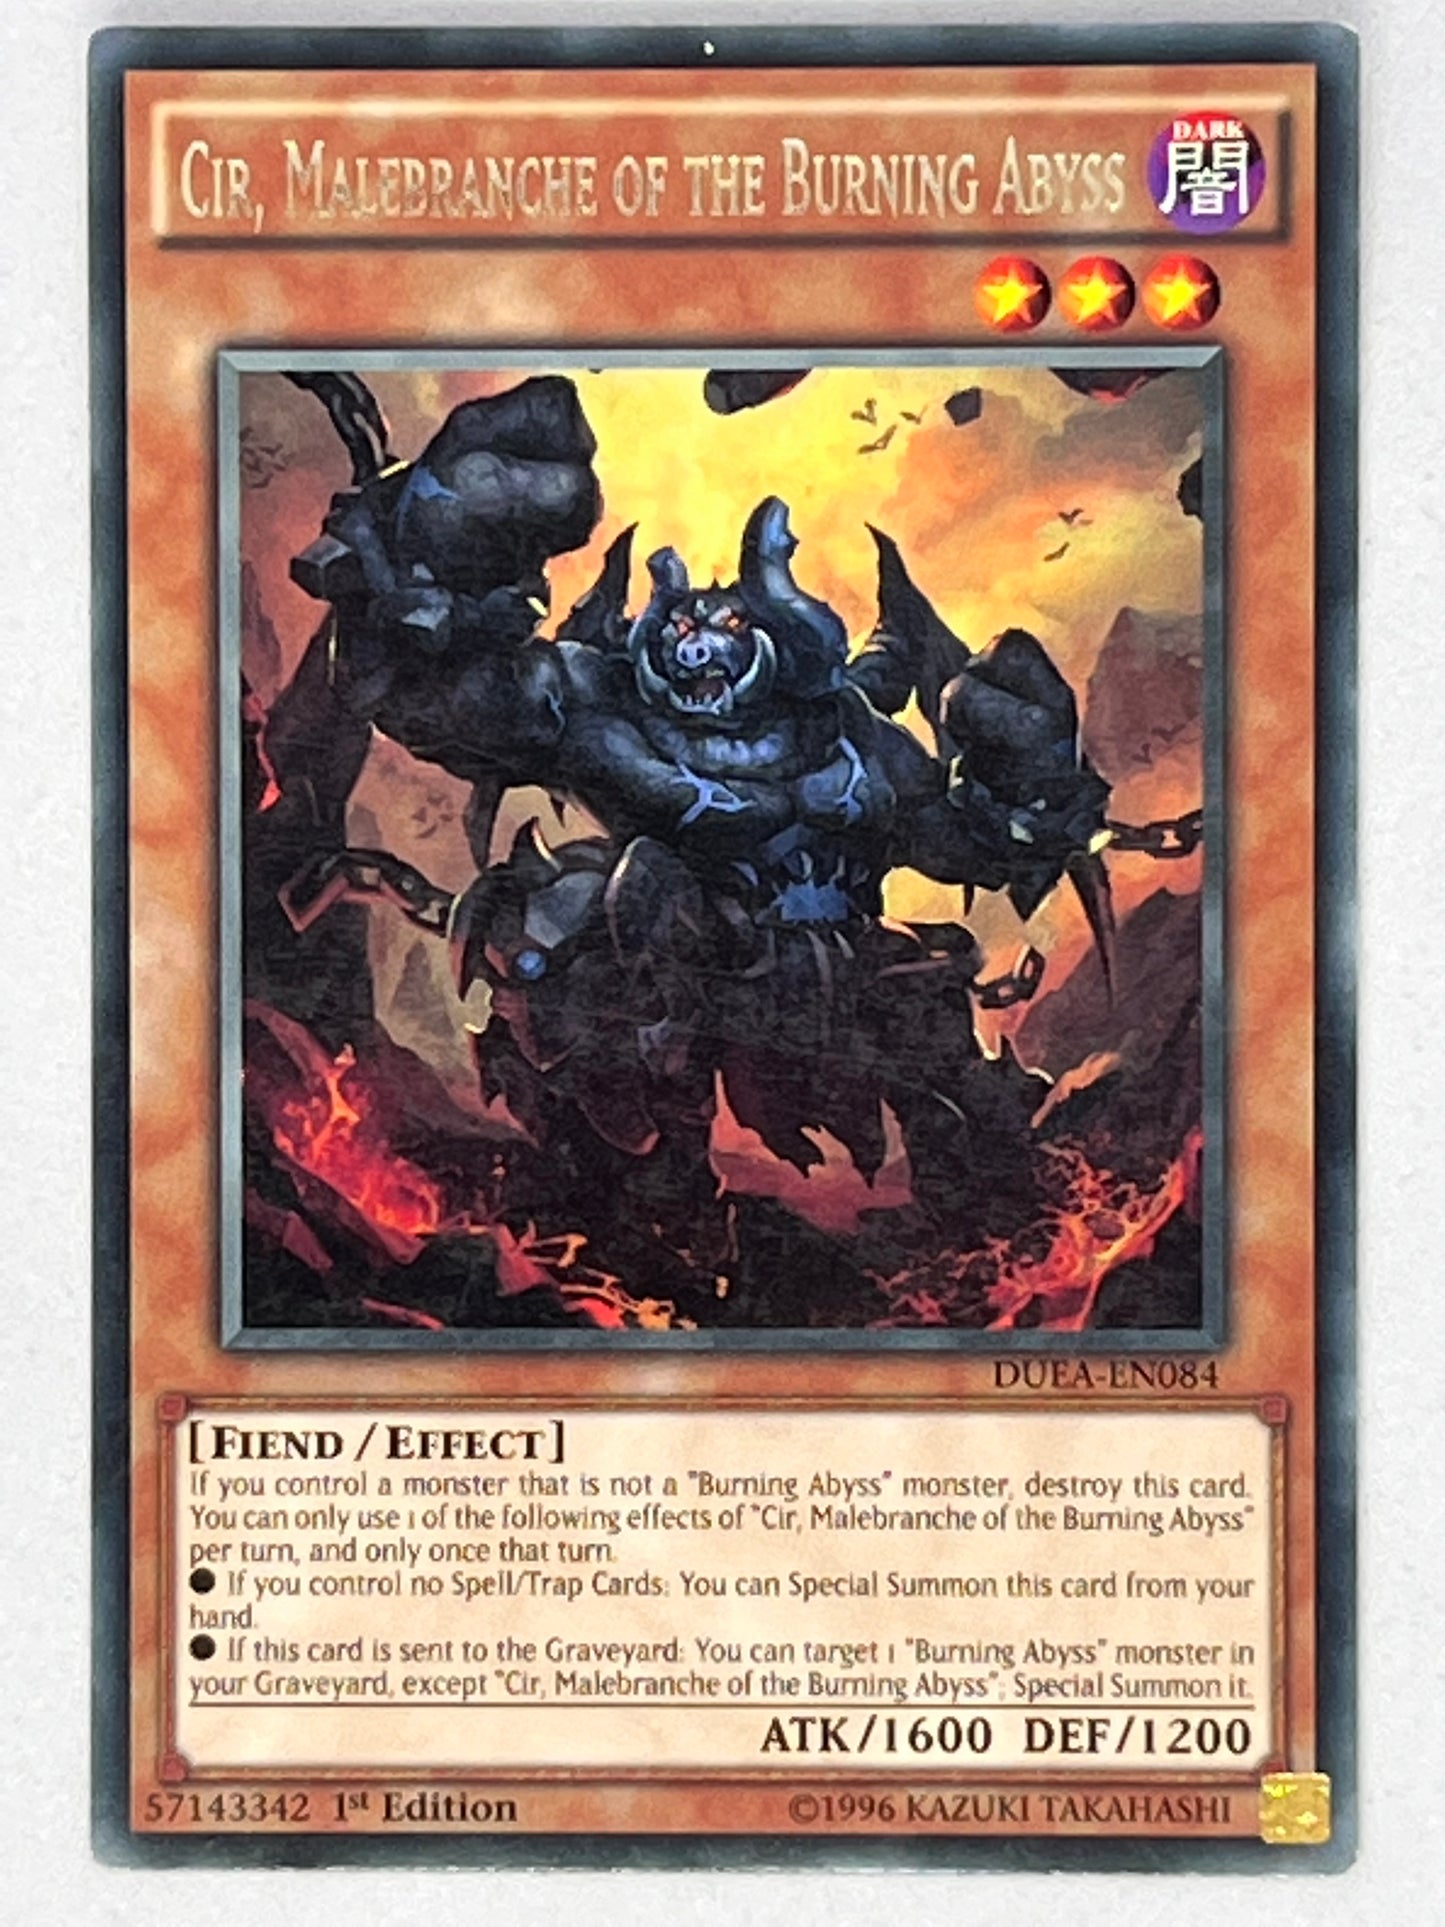 Cir, Malebranche Of The Burning Abyss DUEA-EN084